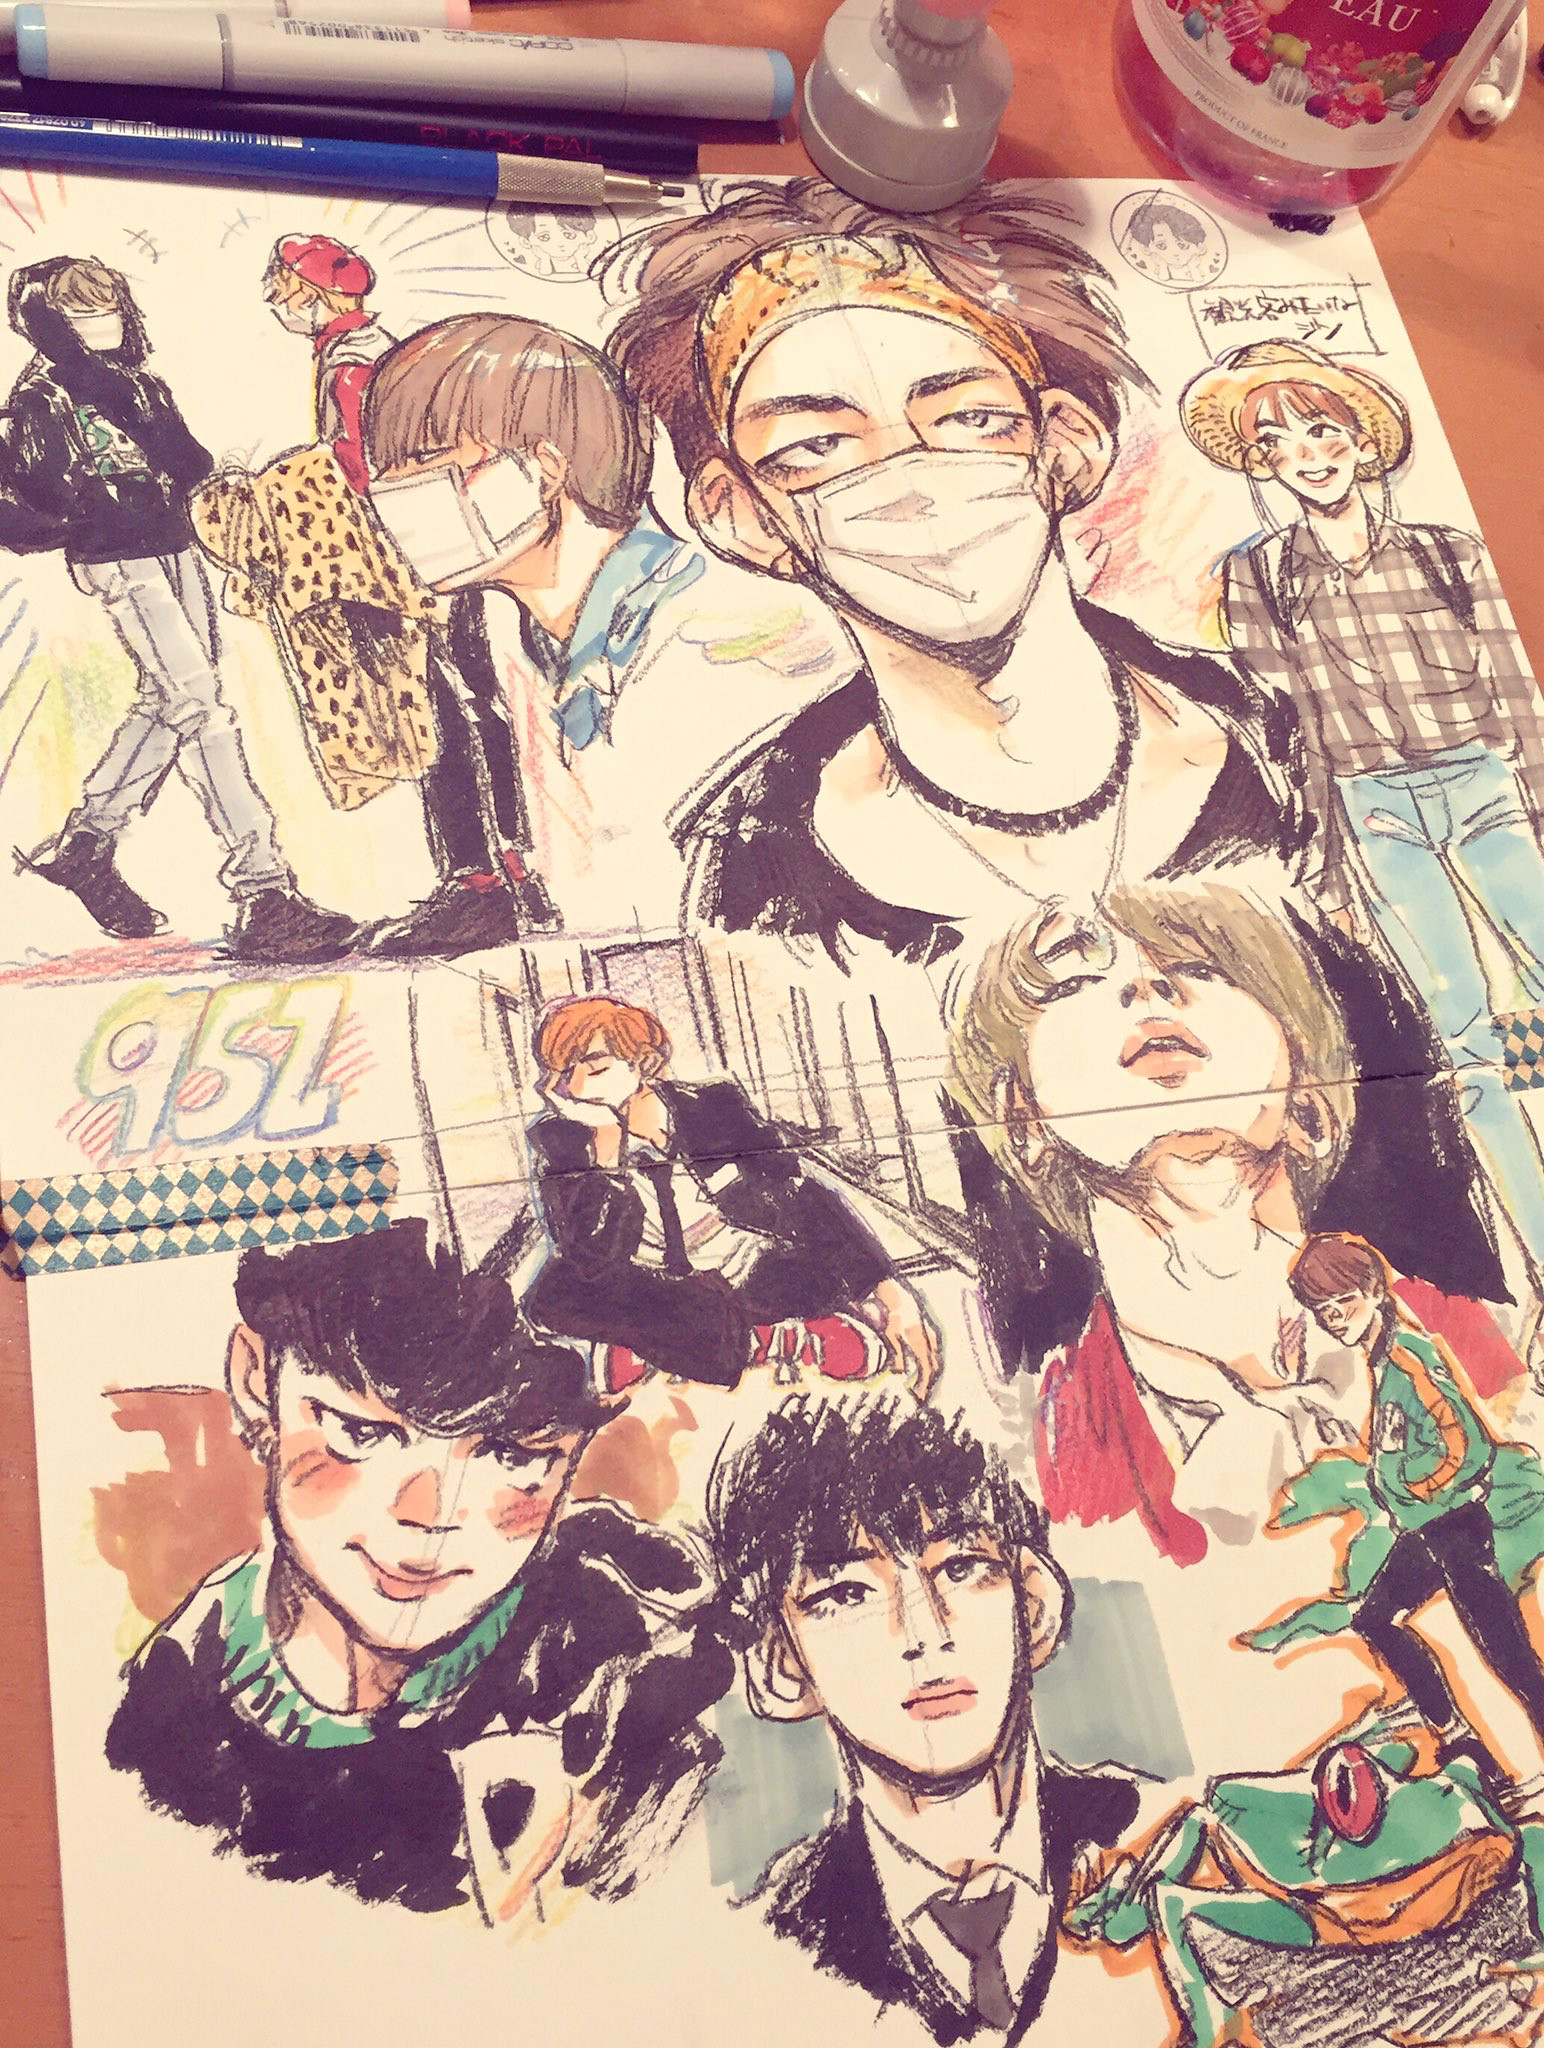 wow this is so good i love bts fan art drawing style drawing